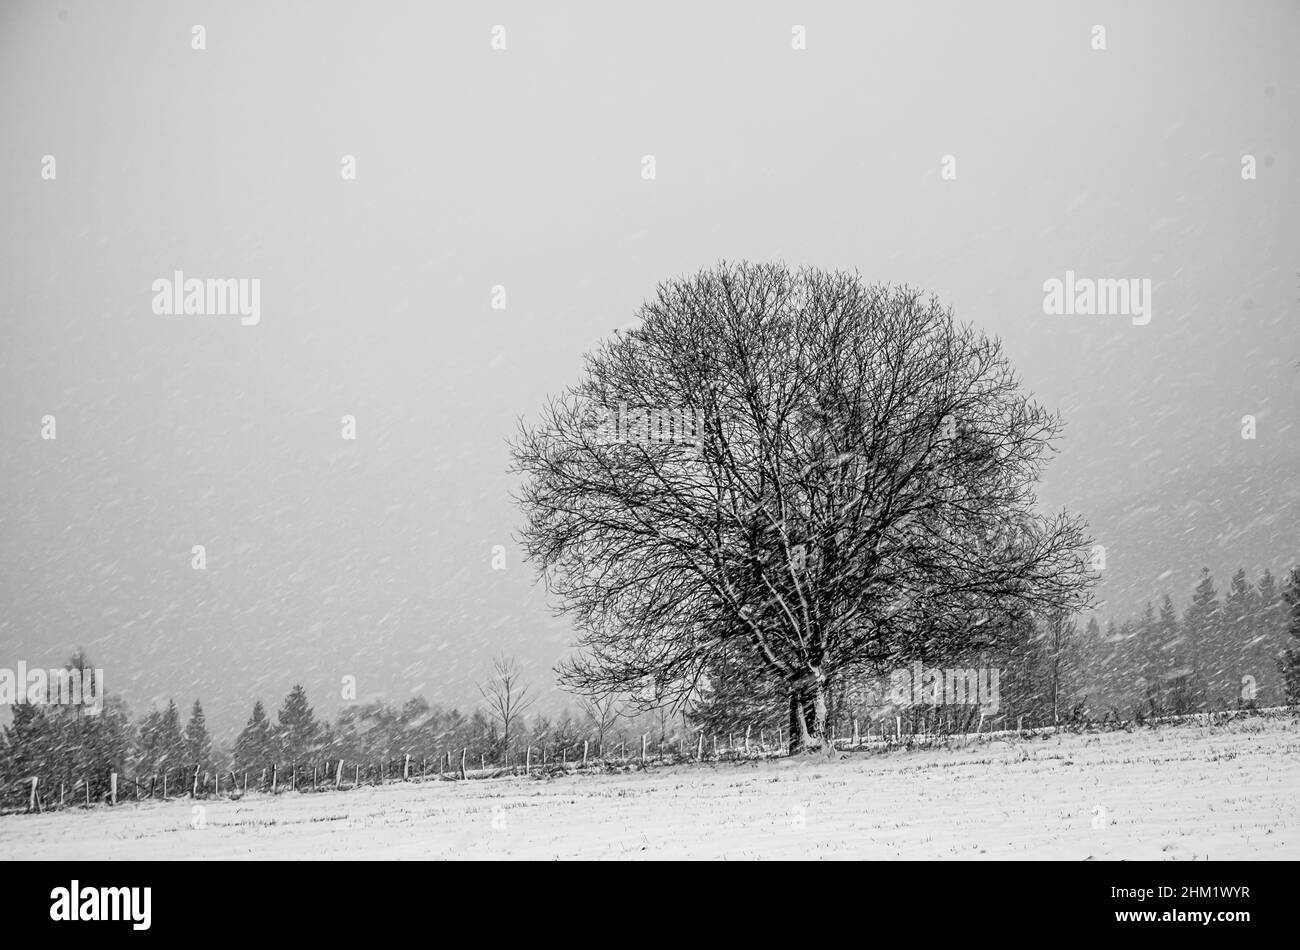 Hilly landscape with solitary tree during heavy snowfall, bad weather, fog, trees covered with snow and rime, mountain landscape. Jeseniky mountains,C Stock Photo